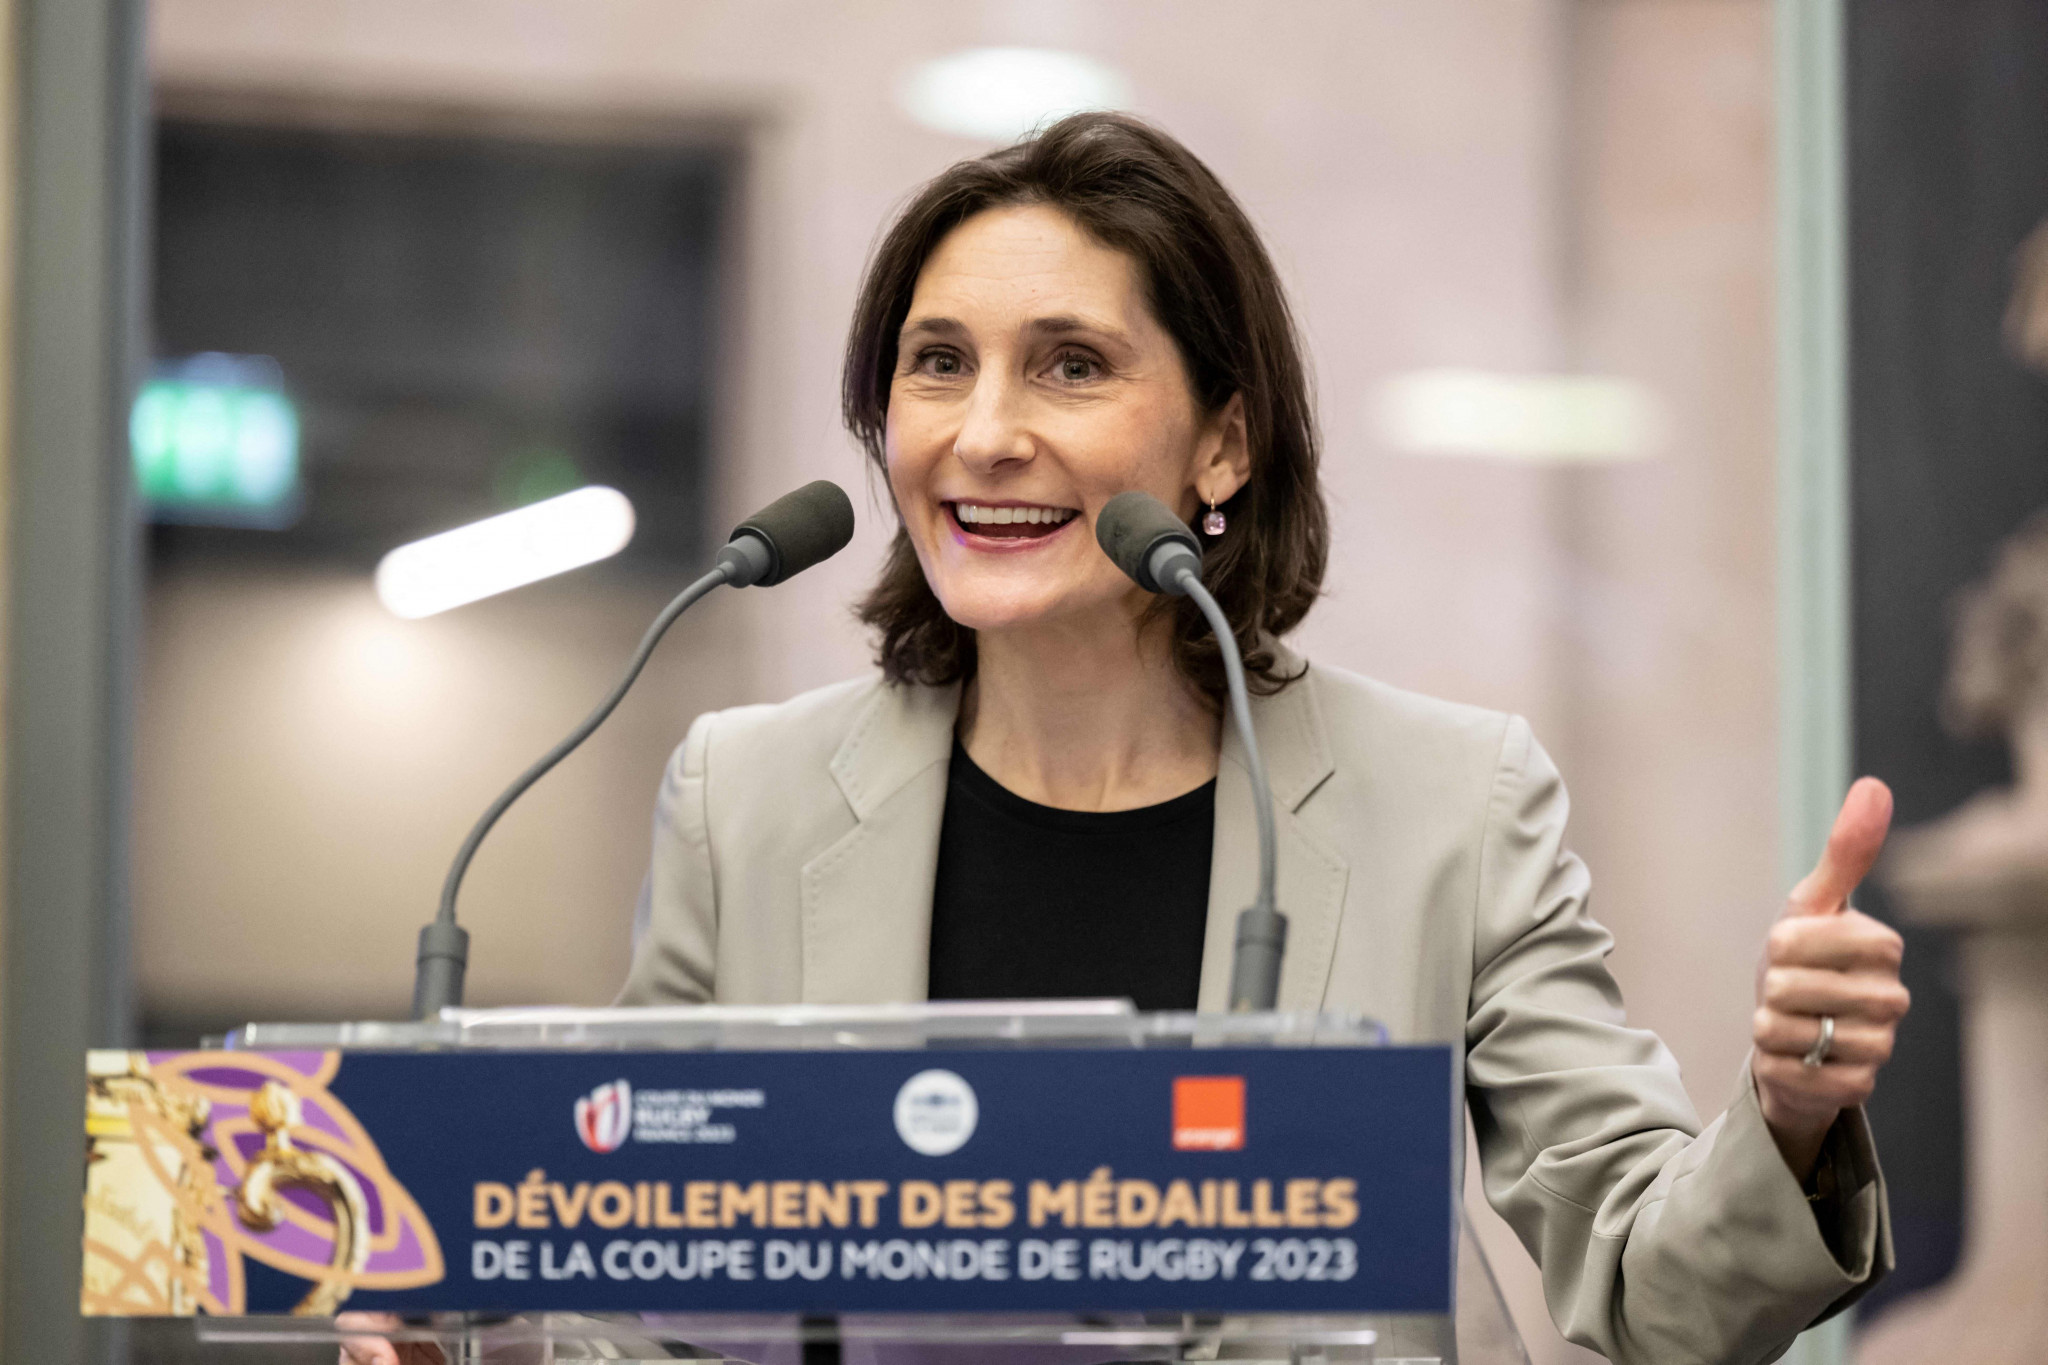 French Sports Minister Amélie Oudéa-Castéra has said her budget will not be cut after Paris 2024 ©Getty Images